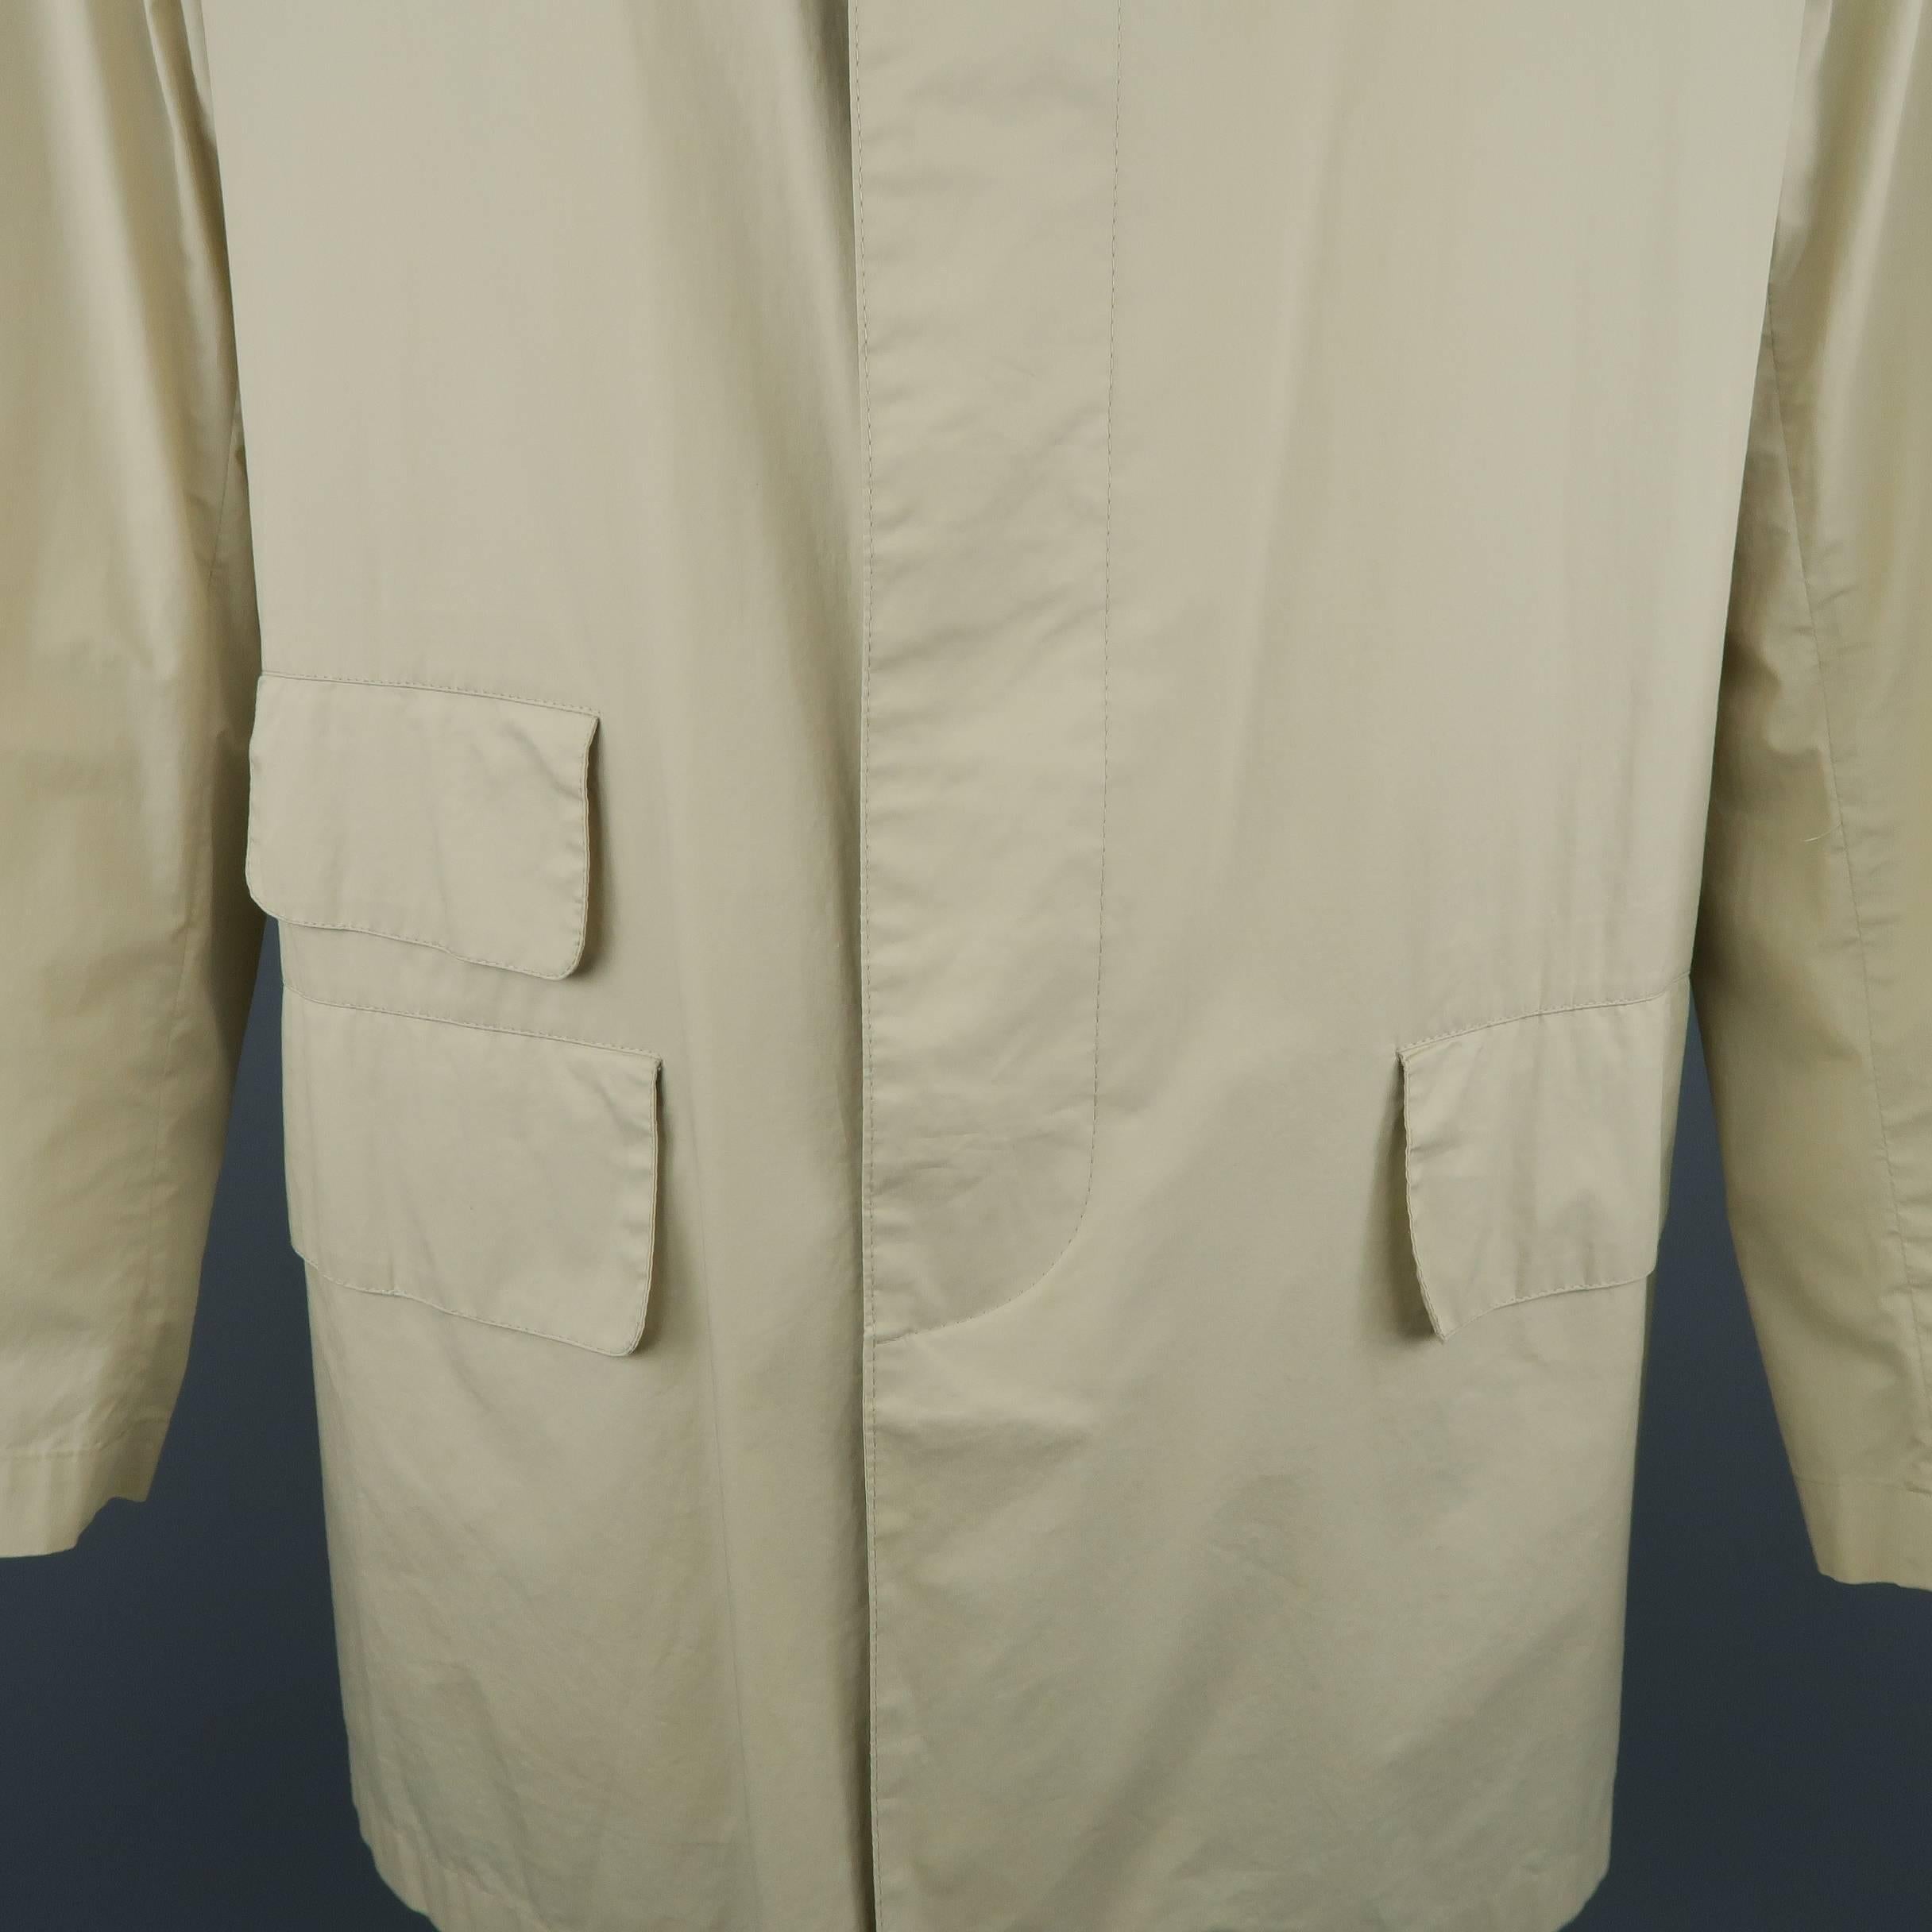 MACKINTOSH rain coat comes in an ultra light weight rubberized cotton with a pointed collar and hidden placket button closure. Made in Scotland.
 
Good Pre-Owned Condition.
Marked: S
 
Measurements:
 
Shoulder: 18.5 in.
Chest: 44 in.
Sleeve: 25